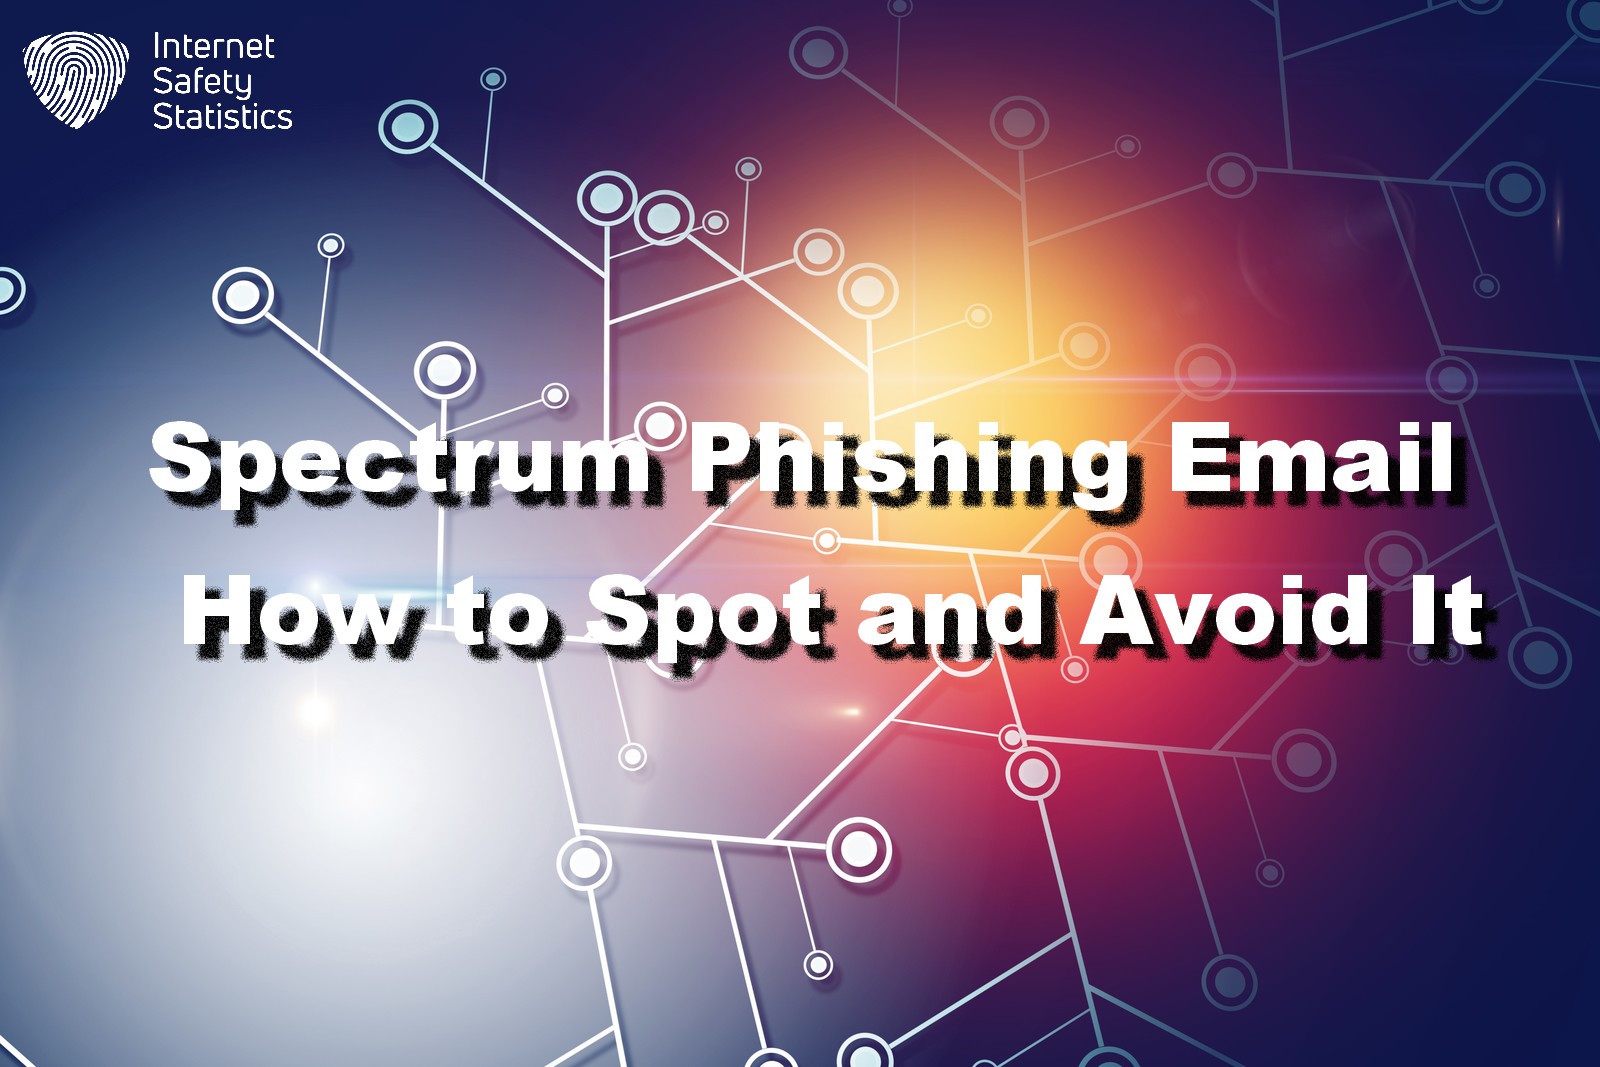 Spectrum Phishing Email: How to Spot and Avoid It